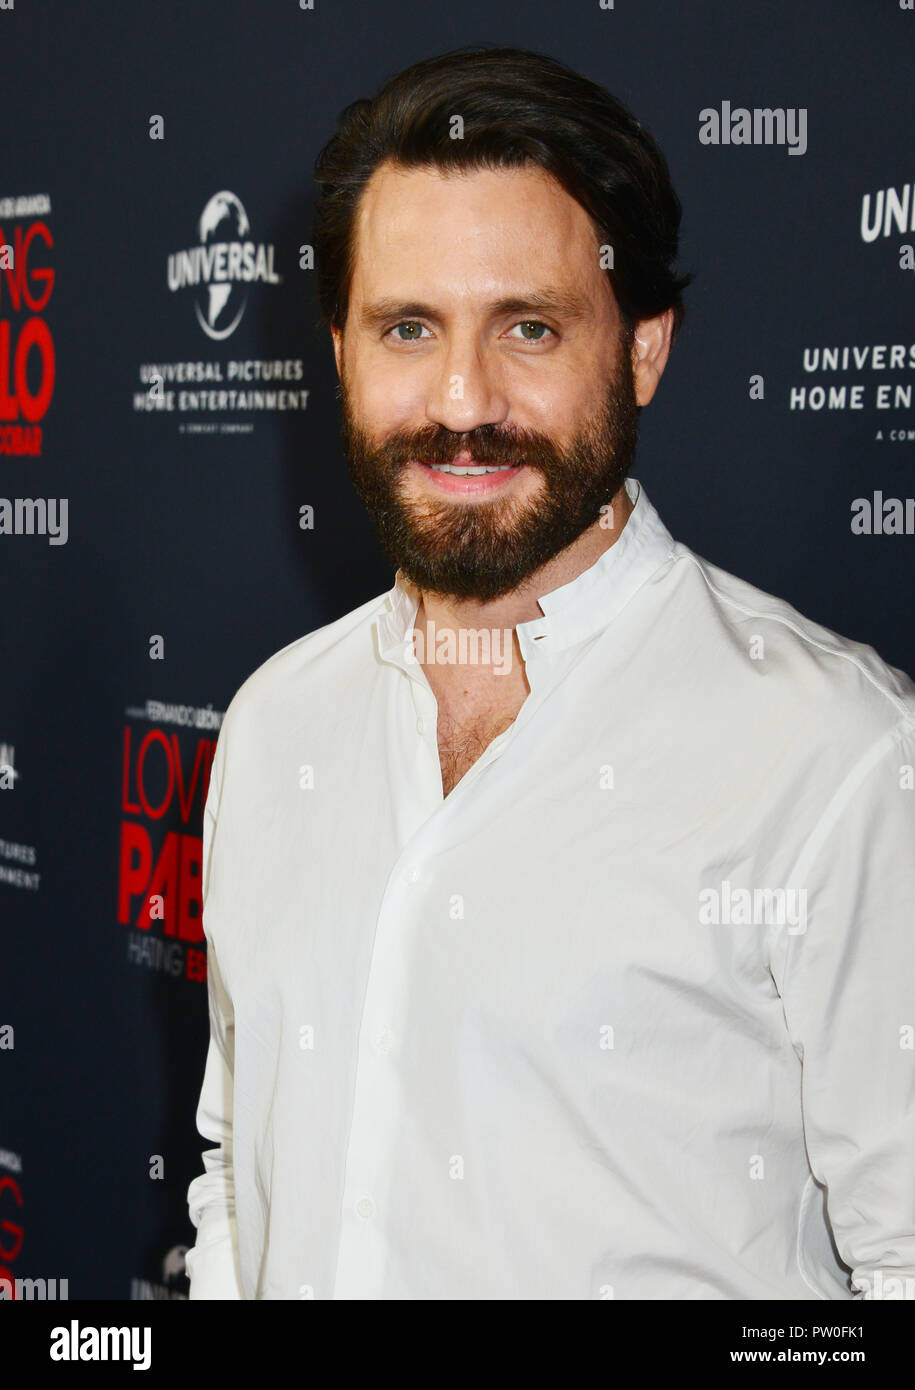 Edgar Ramirez 032 arrives at the Universal Pictures Home Entertainment Content Group's 'Loving Pablo' Special Screening at The London West Hollywood on September 16, 2018 in West Hollywood, California. Stock Photo